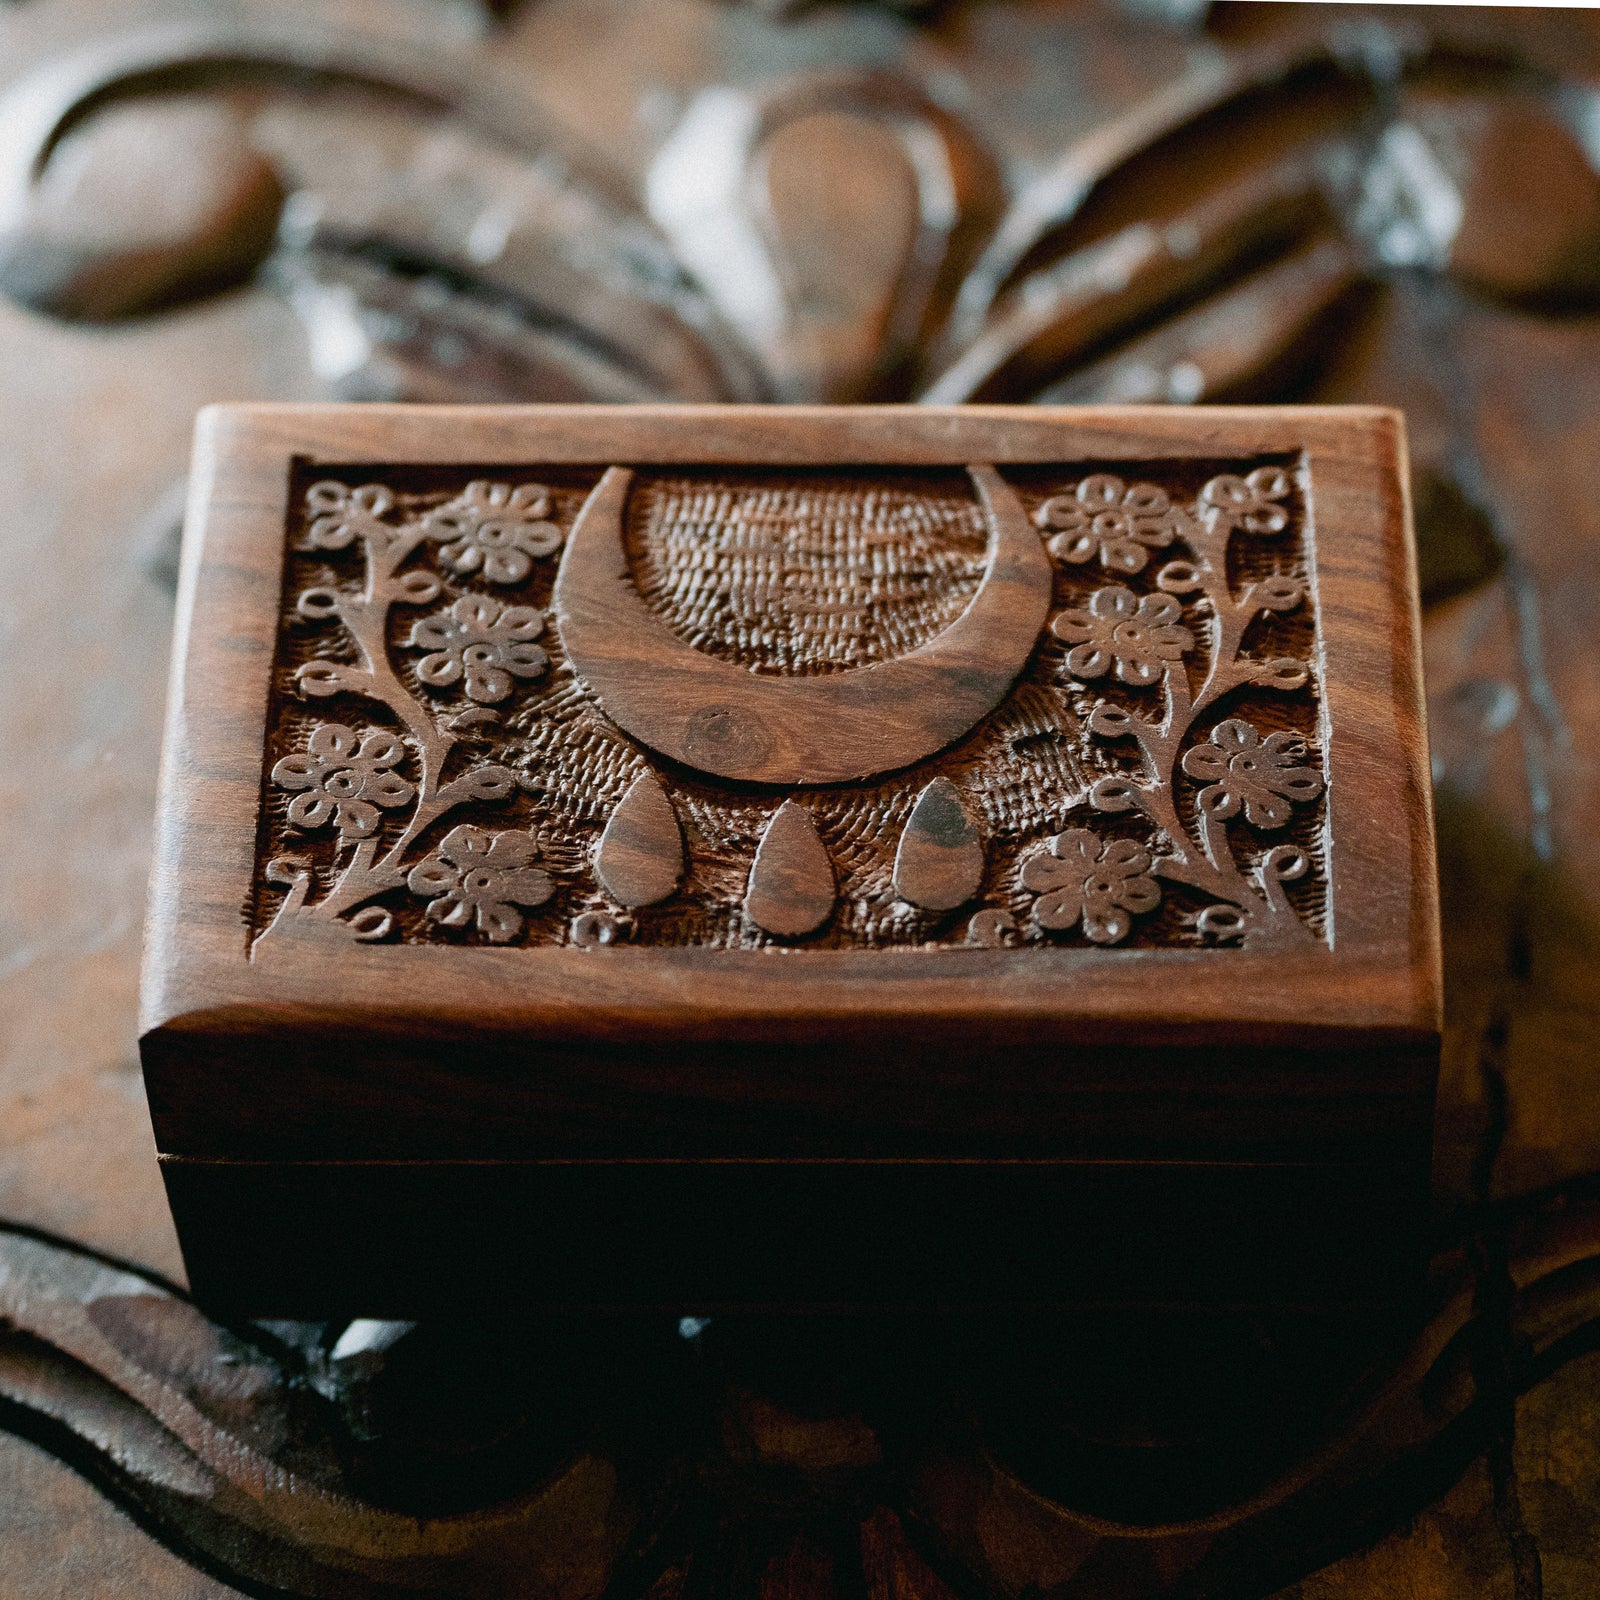 "Blessings" Wooden Box